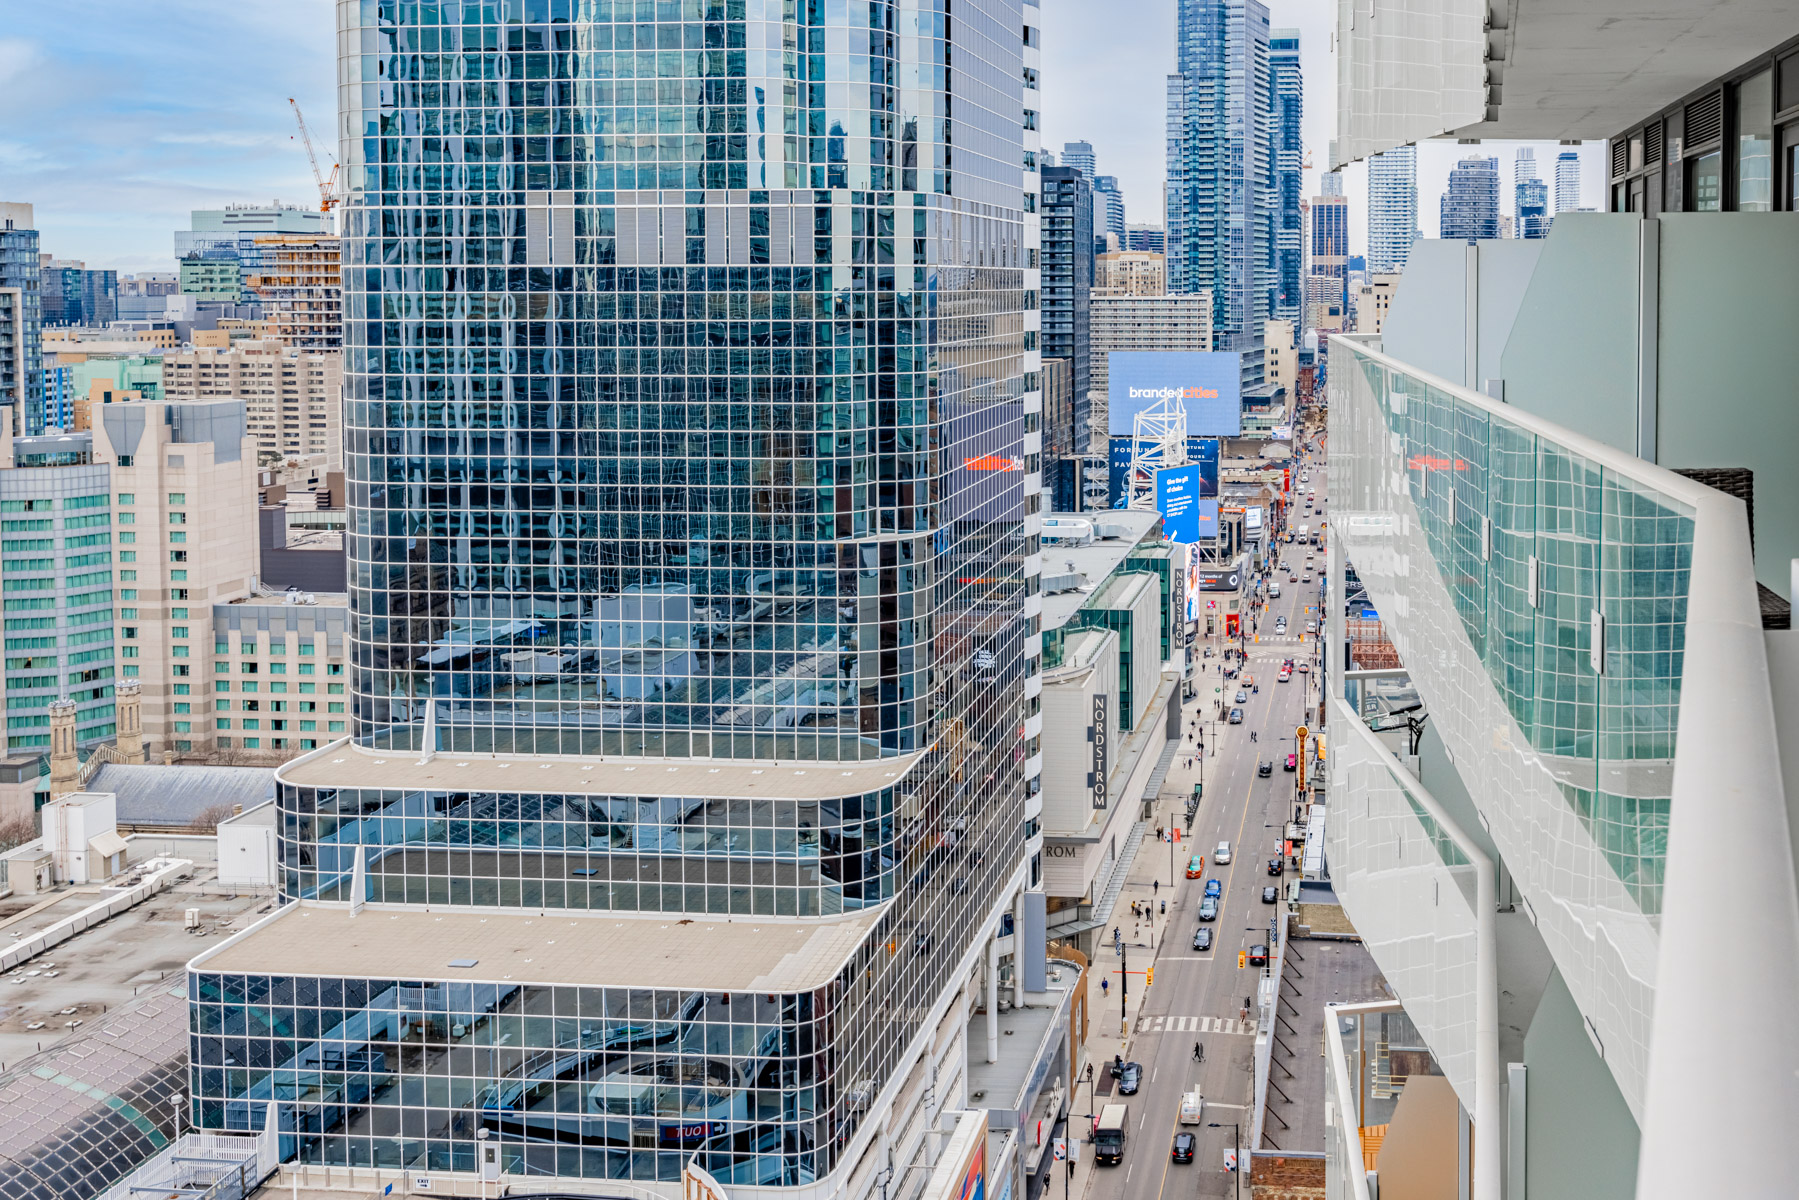 Top down view of busy Yonge St in Toronto.